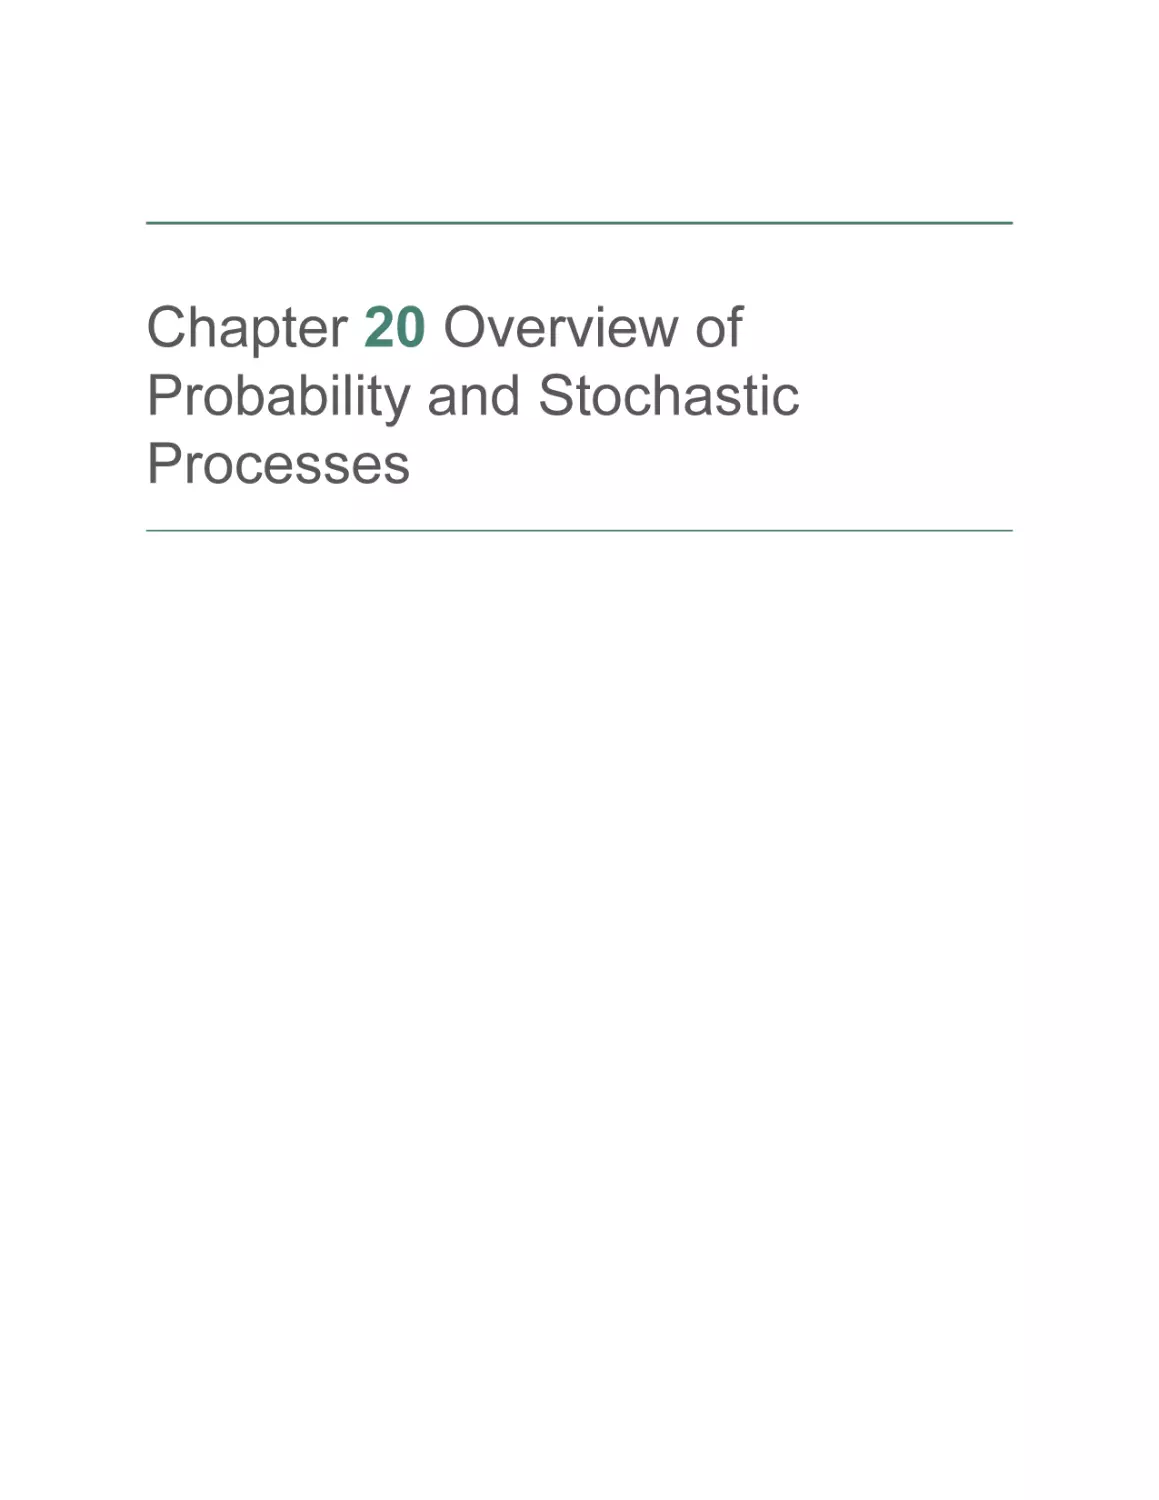 Chapter 20 Overview of Probability and Stochastic Processes